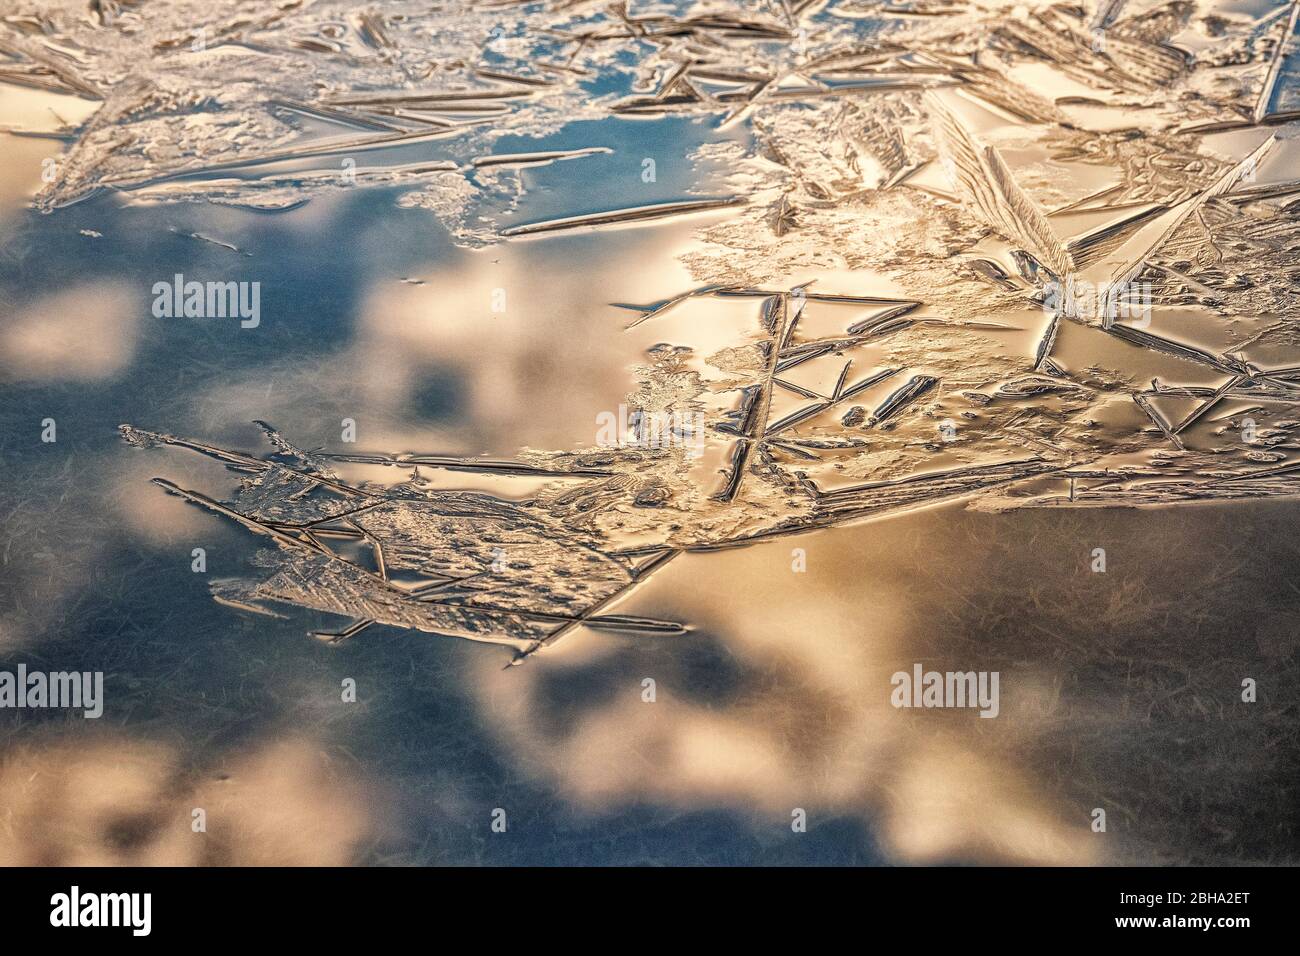 onset of winter, water surface freezes over, close-up Stock Photo